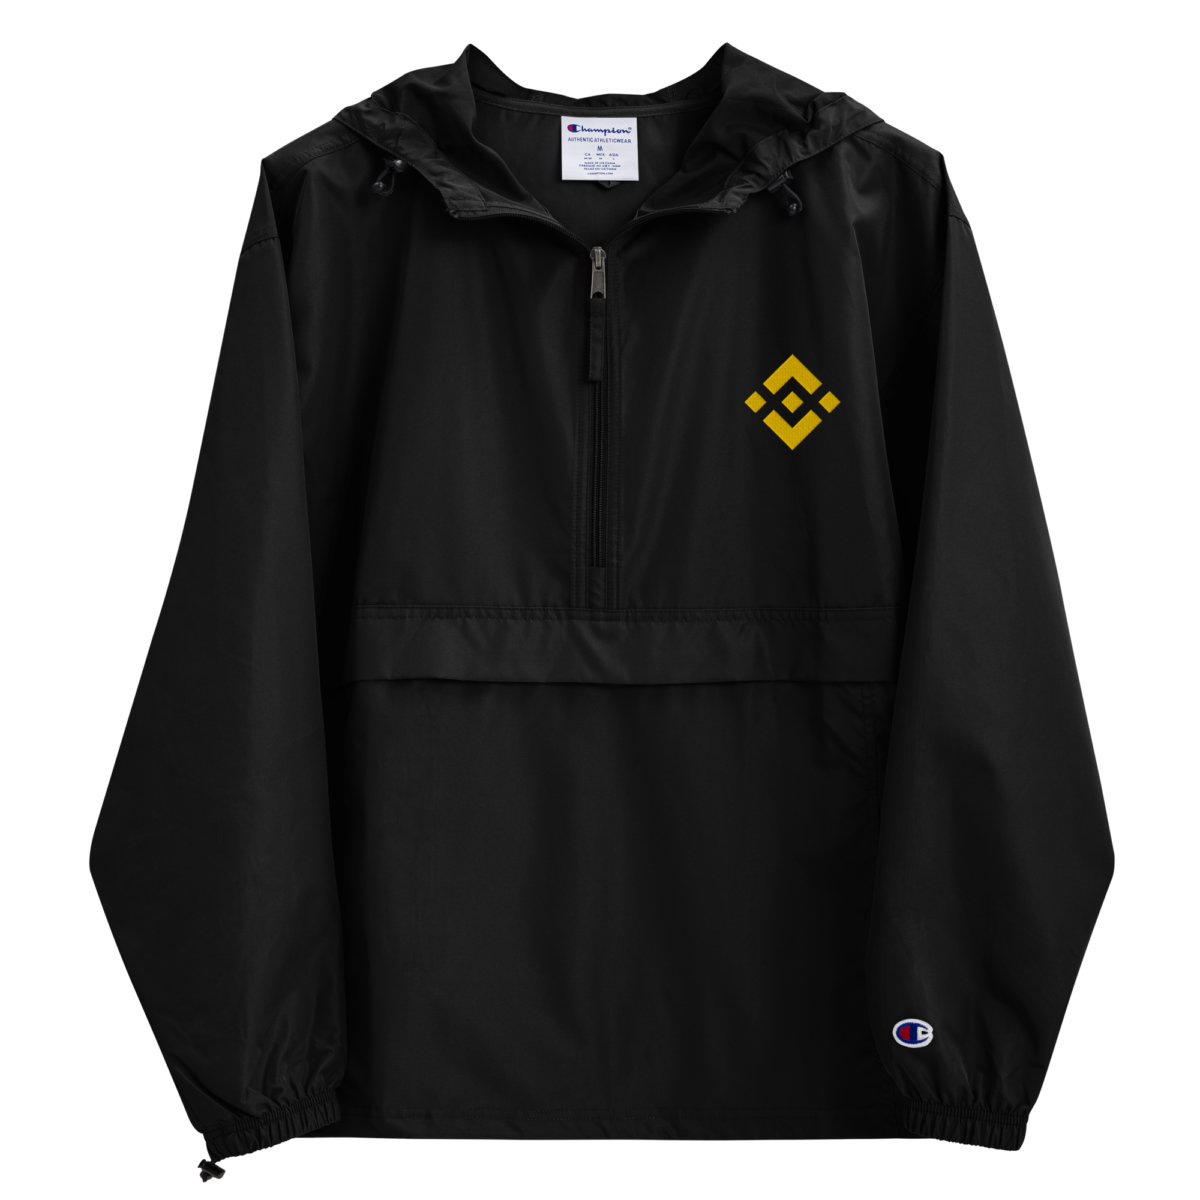 embroidered champion packable jacket black front 631f401a84178 - Binance (BNB) Champion Packable Jacket